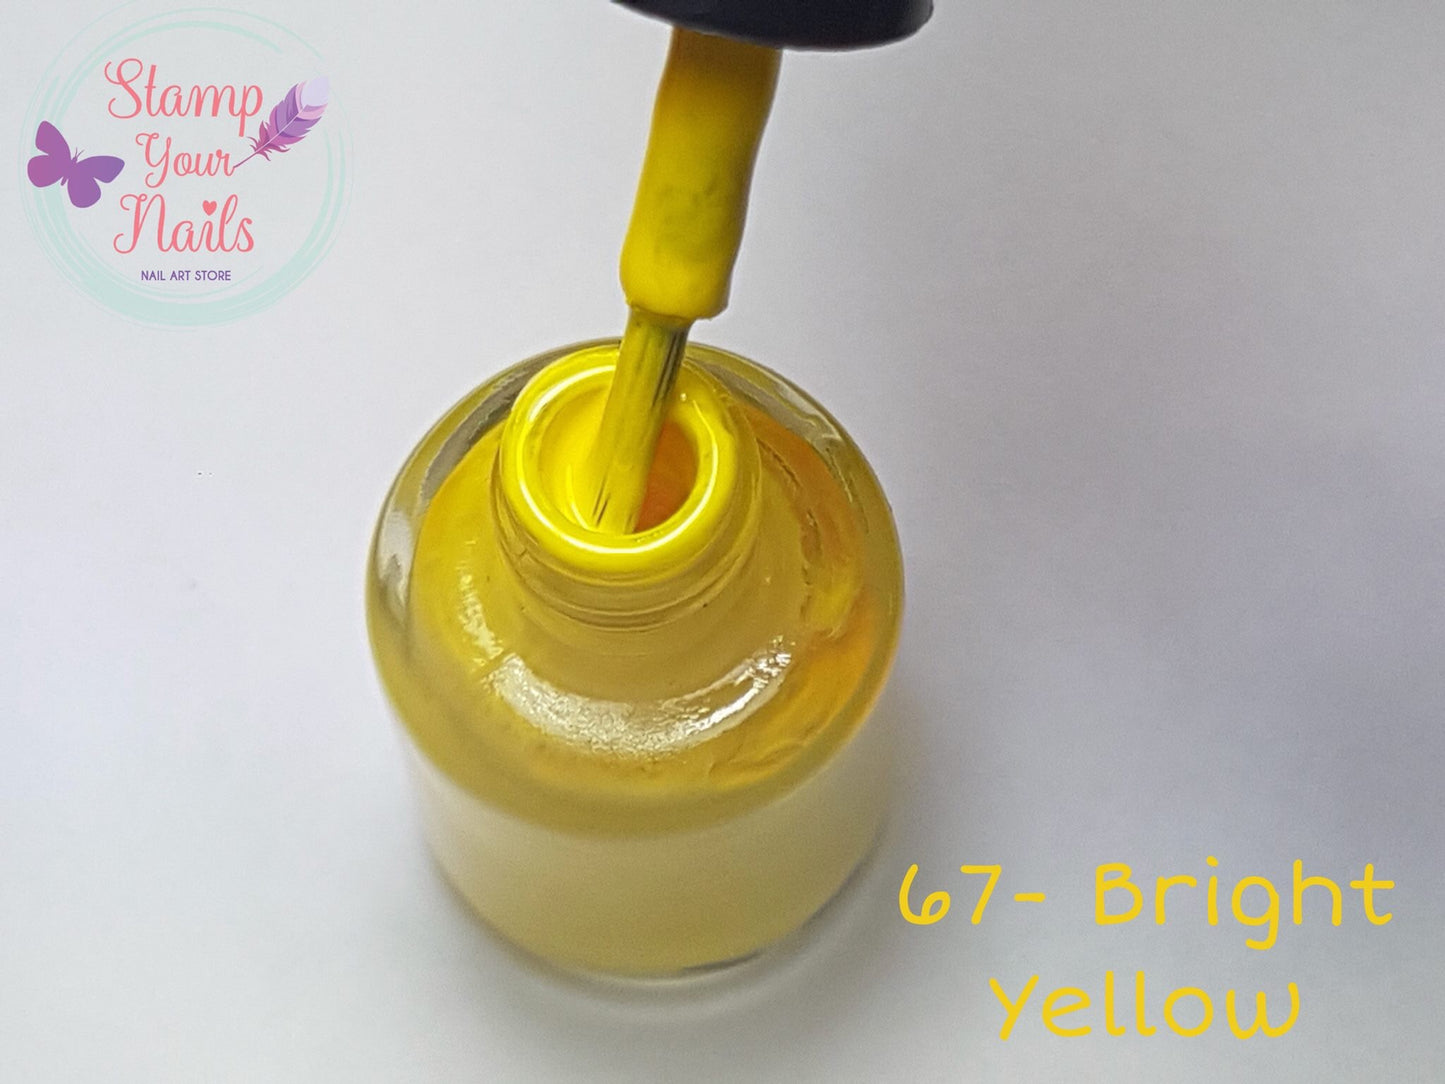 67 Bright Yellow - Stamp your nails